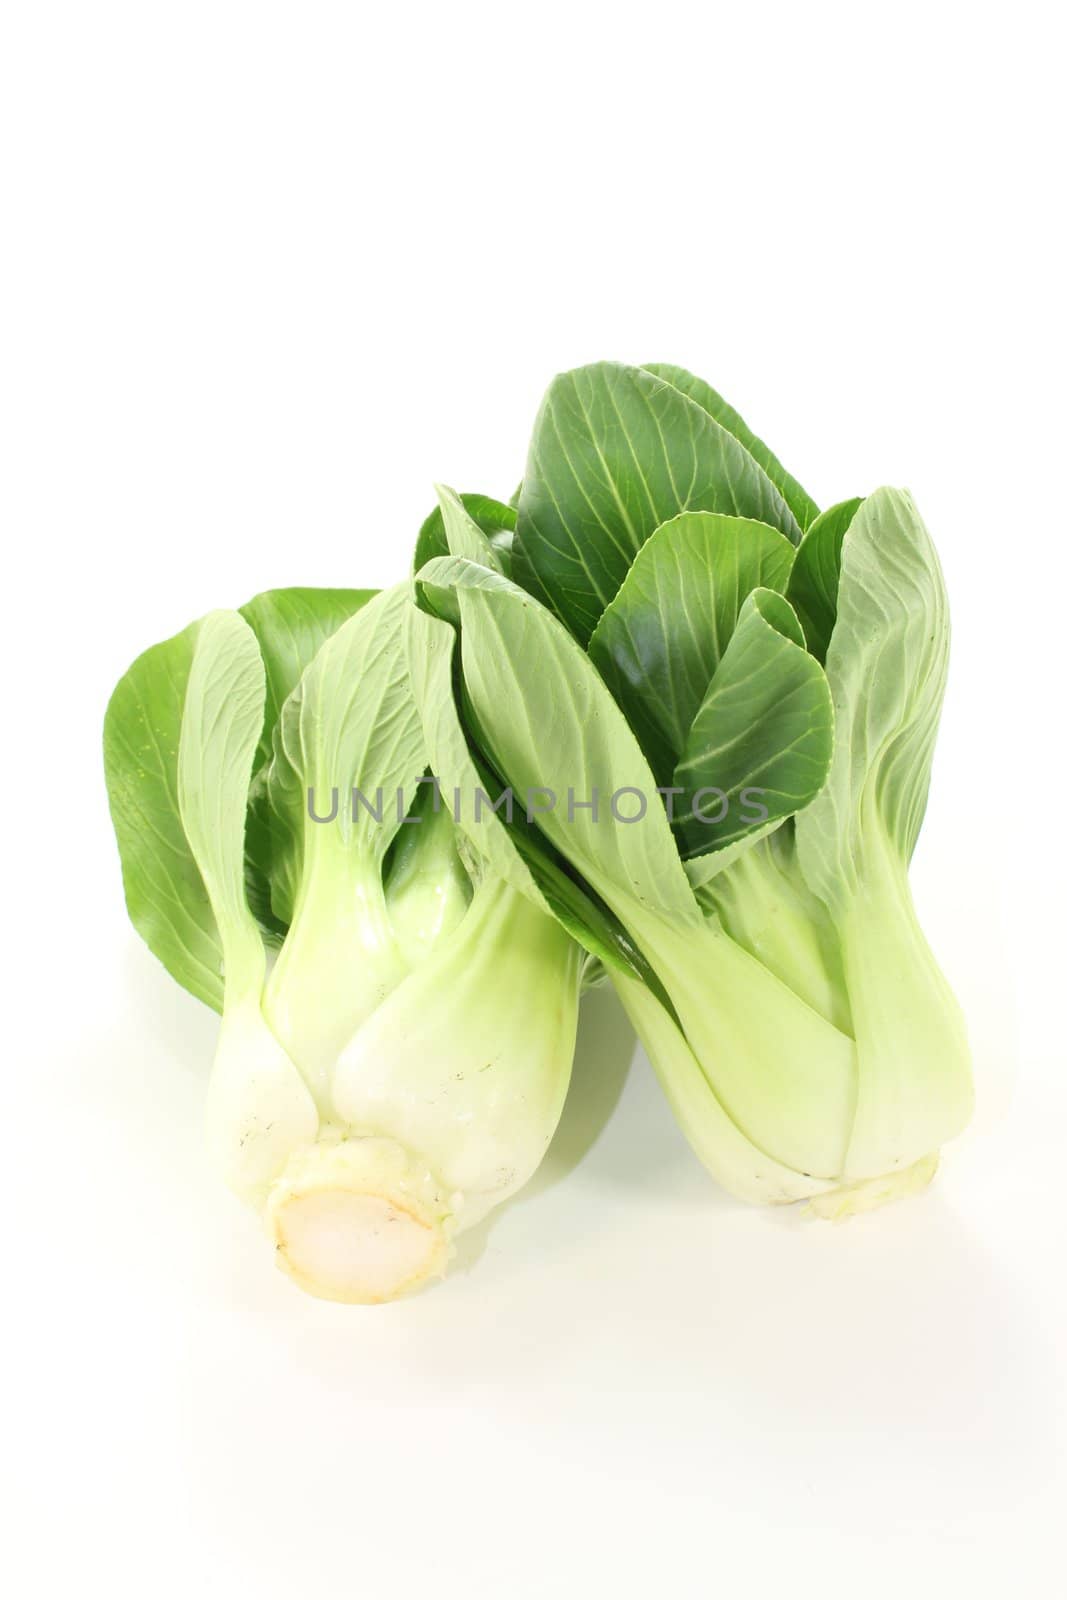 delicious Asian white-green pak choi on a light background